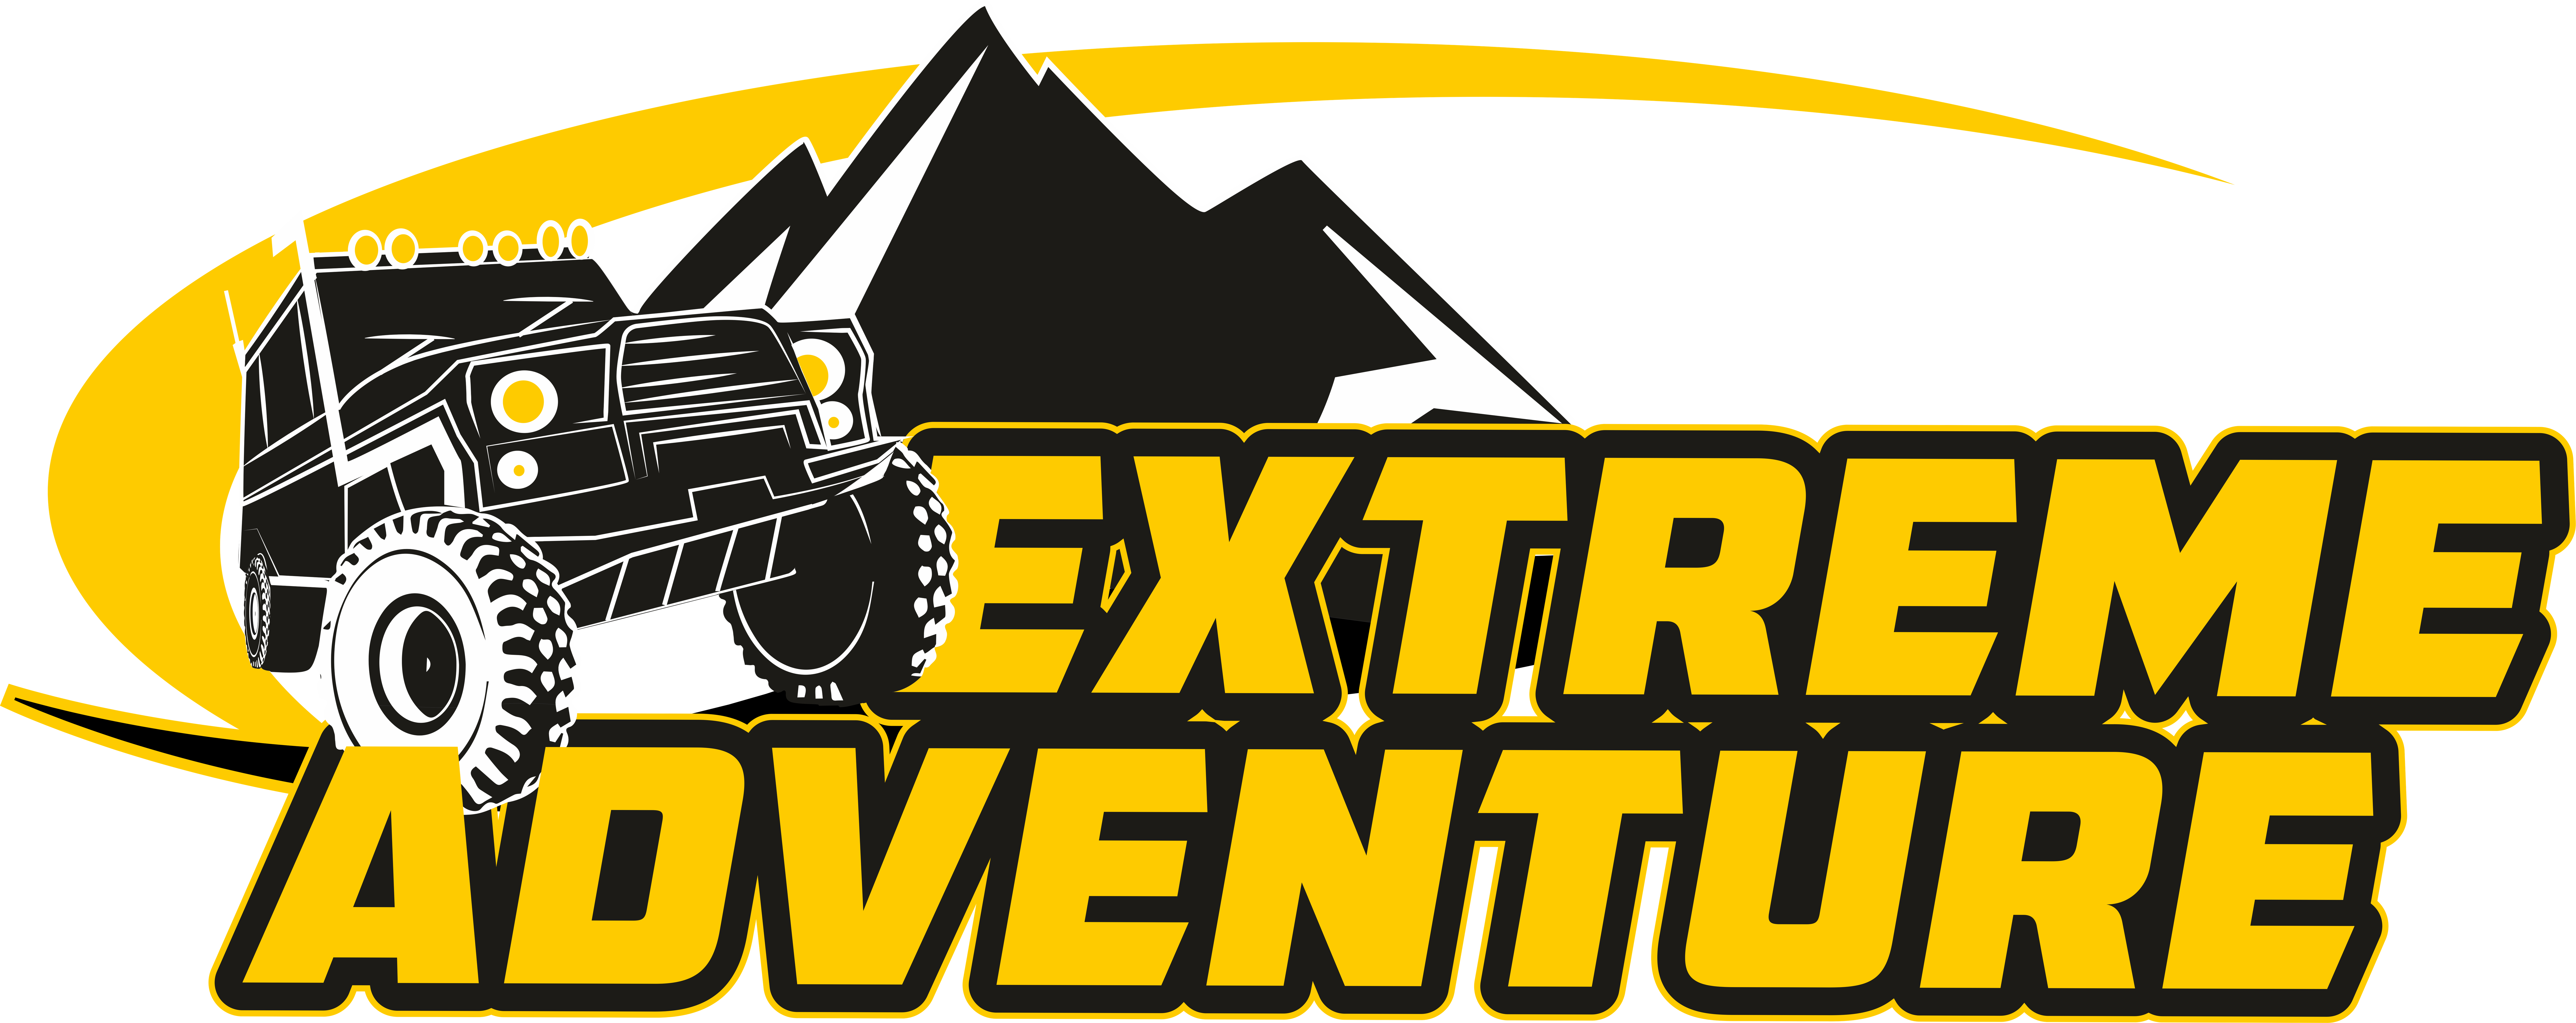 Company logo showing the off road car and snow-covered mountains.